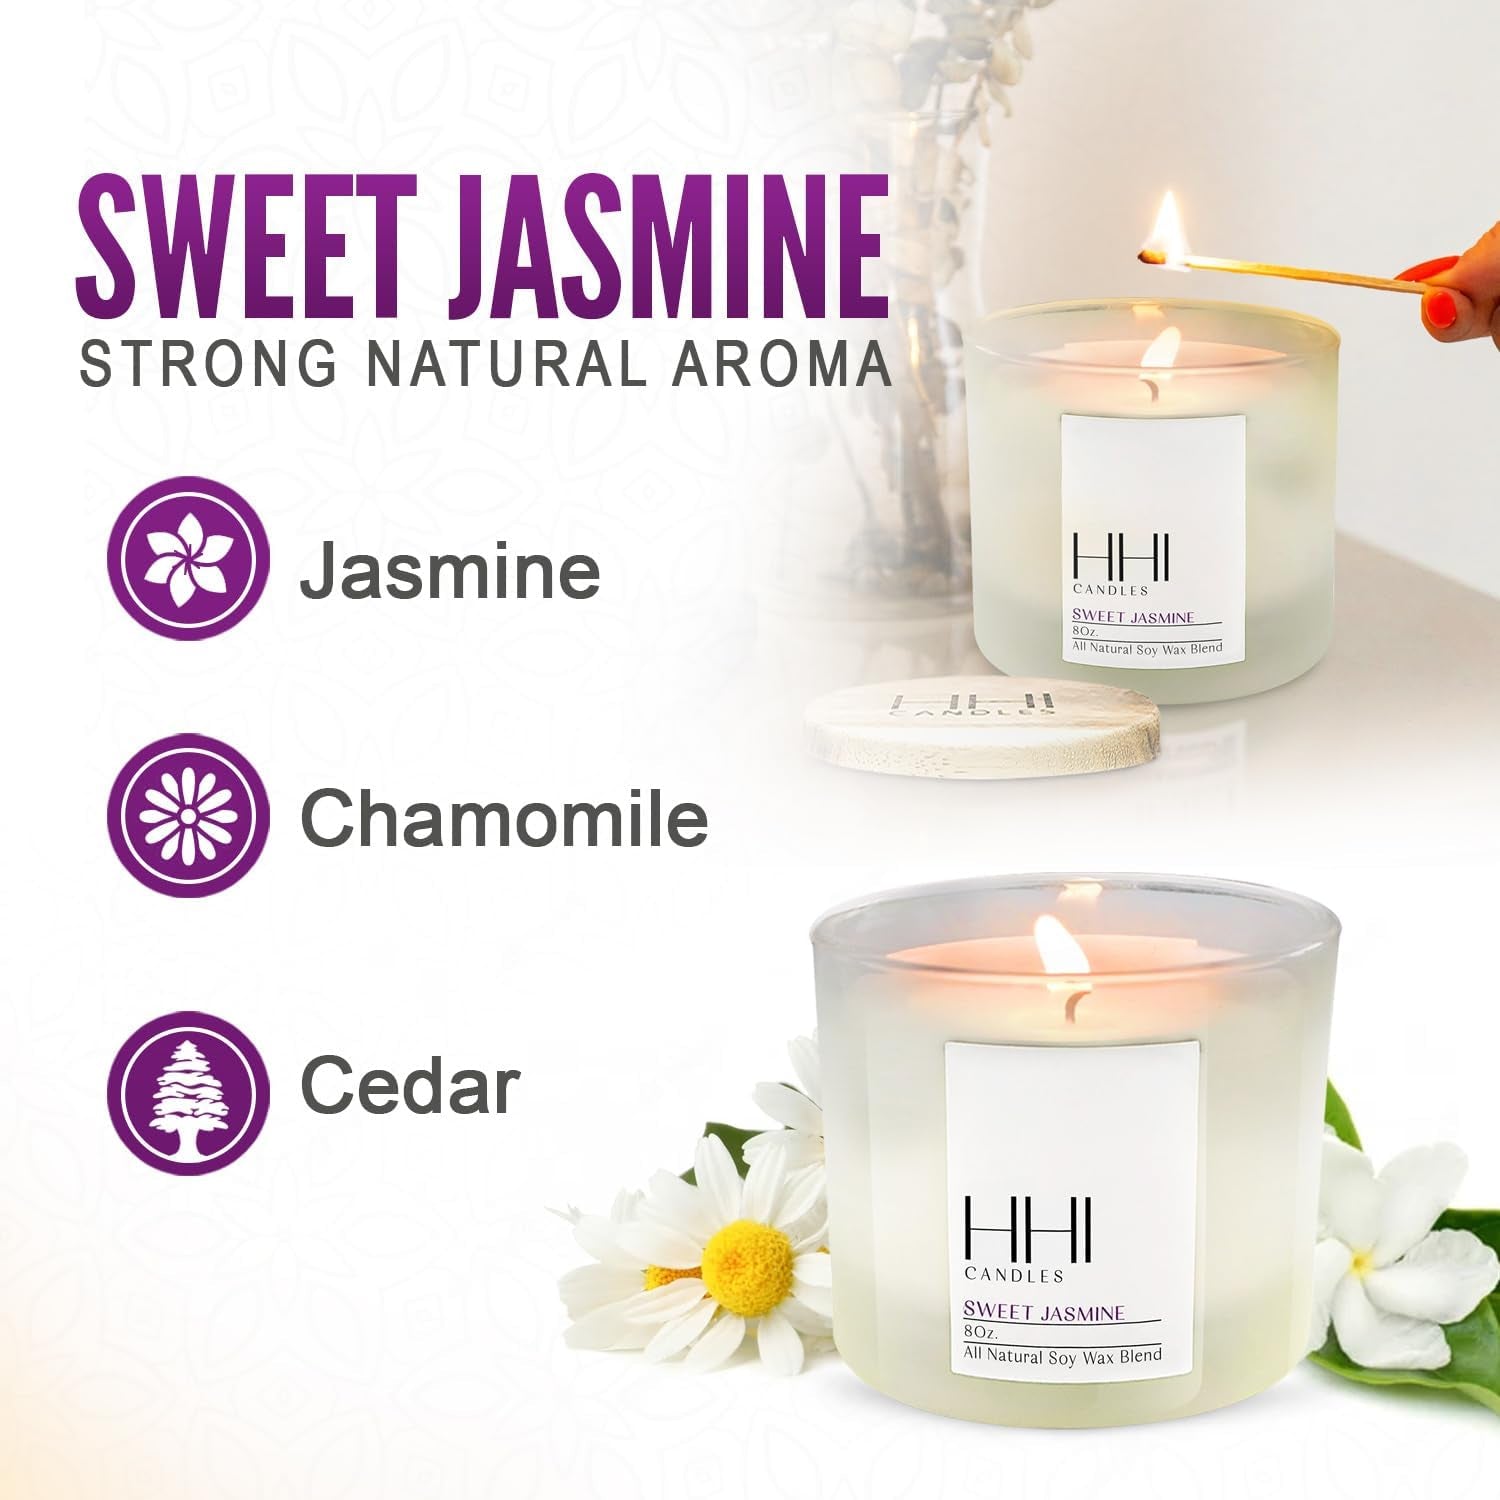 Sweet Jasmine Candle by | Rich Floral Jasmine Fragrance | Single Wick Natural Soy Candles for Home & Spa |Long Lasting Burn Candle Gifts for Women| Large Scented Candles 8 Ounce